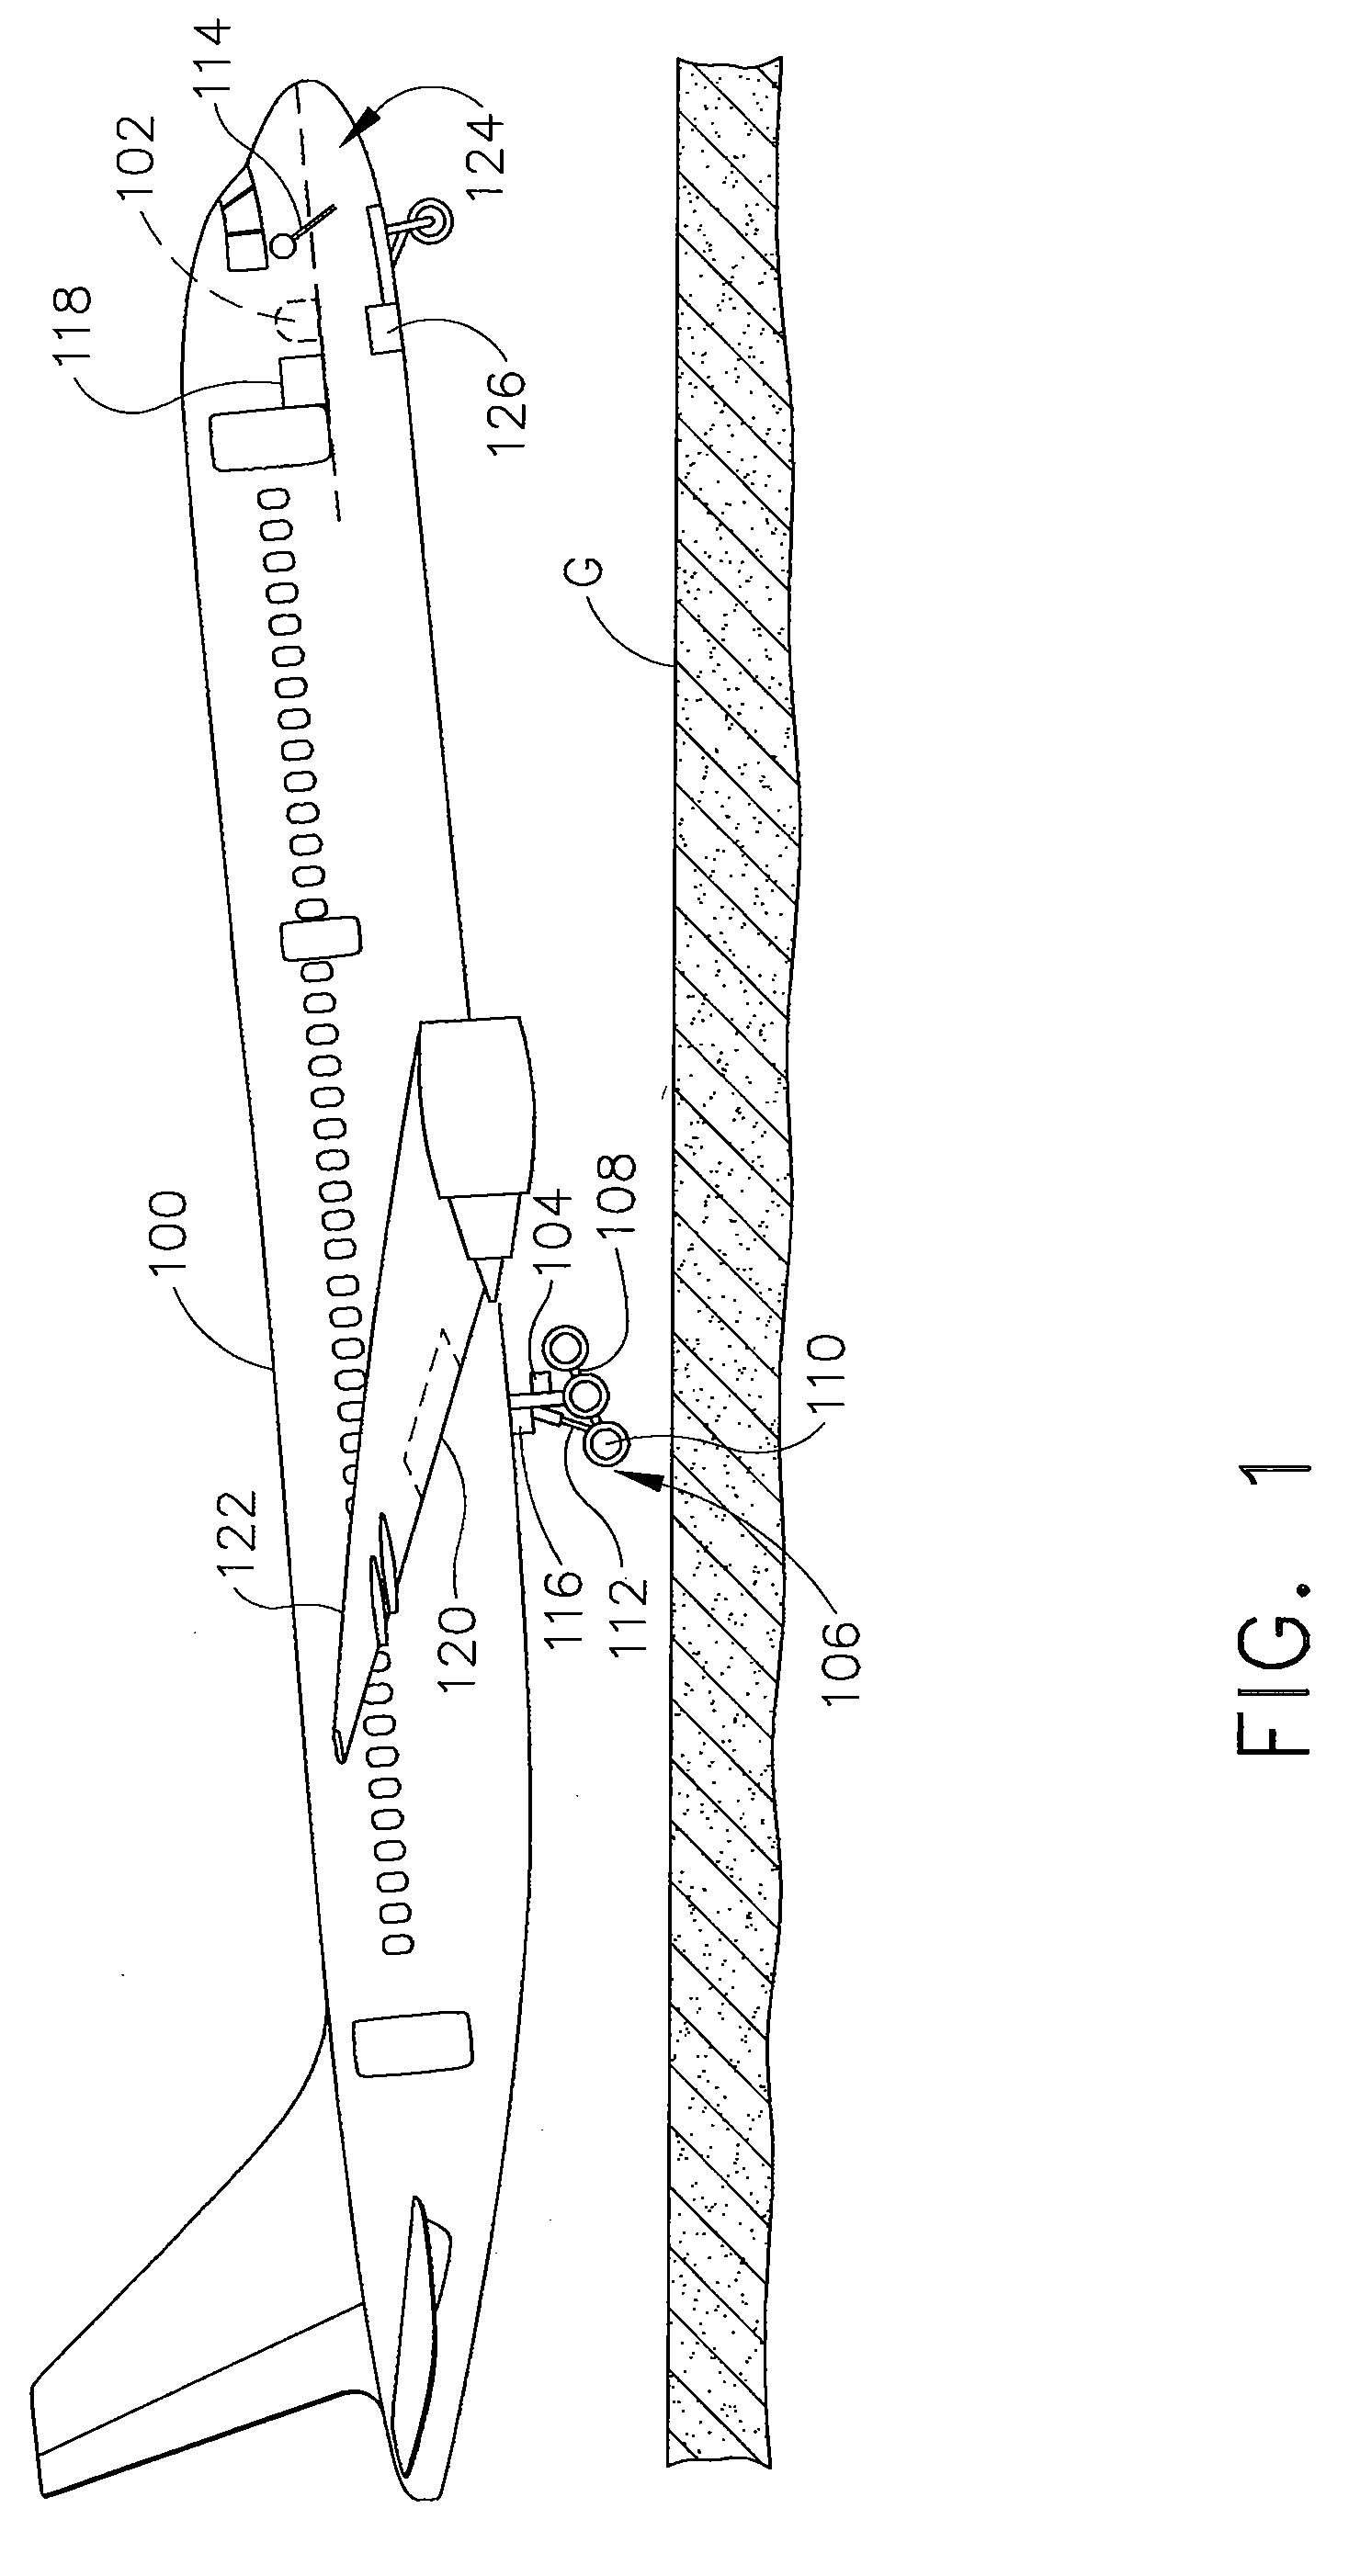 Air-ground detection system and method